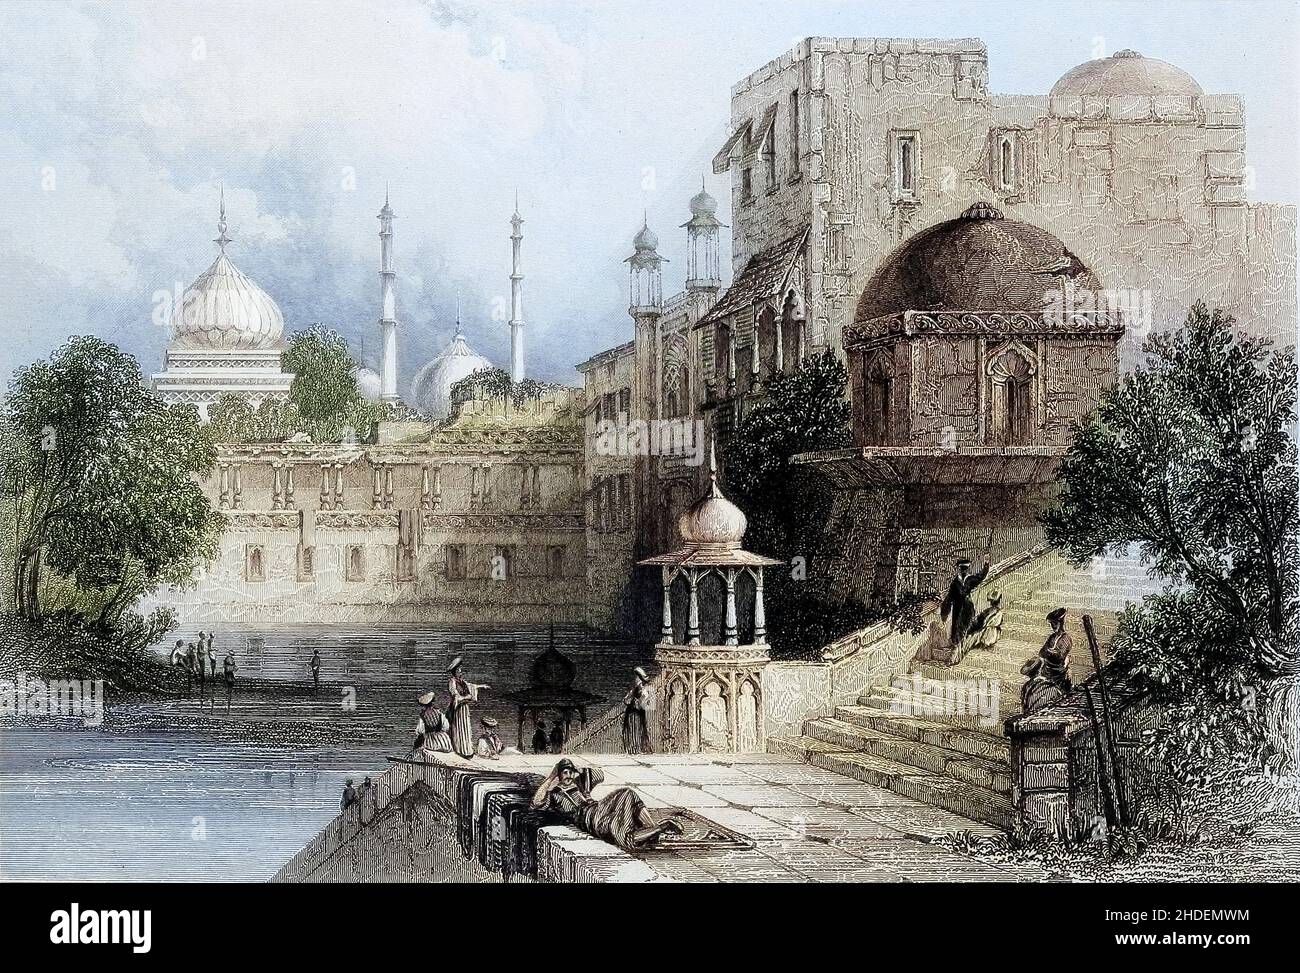 BAOLI AND JEHANGHIR’S PALACE, DELHI from the book The Oriental annual; containing a series of tales, legends, & historical romances by Thomas Bacon. with engravings by W. and E. Finden from sketches by the author and Captain Meadows Taylor.  Published in LONDON by CHARLES TILT, FLEET STREET 1840. Stock Photo